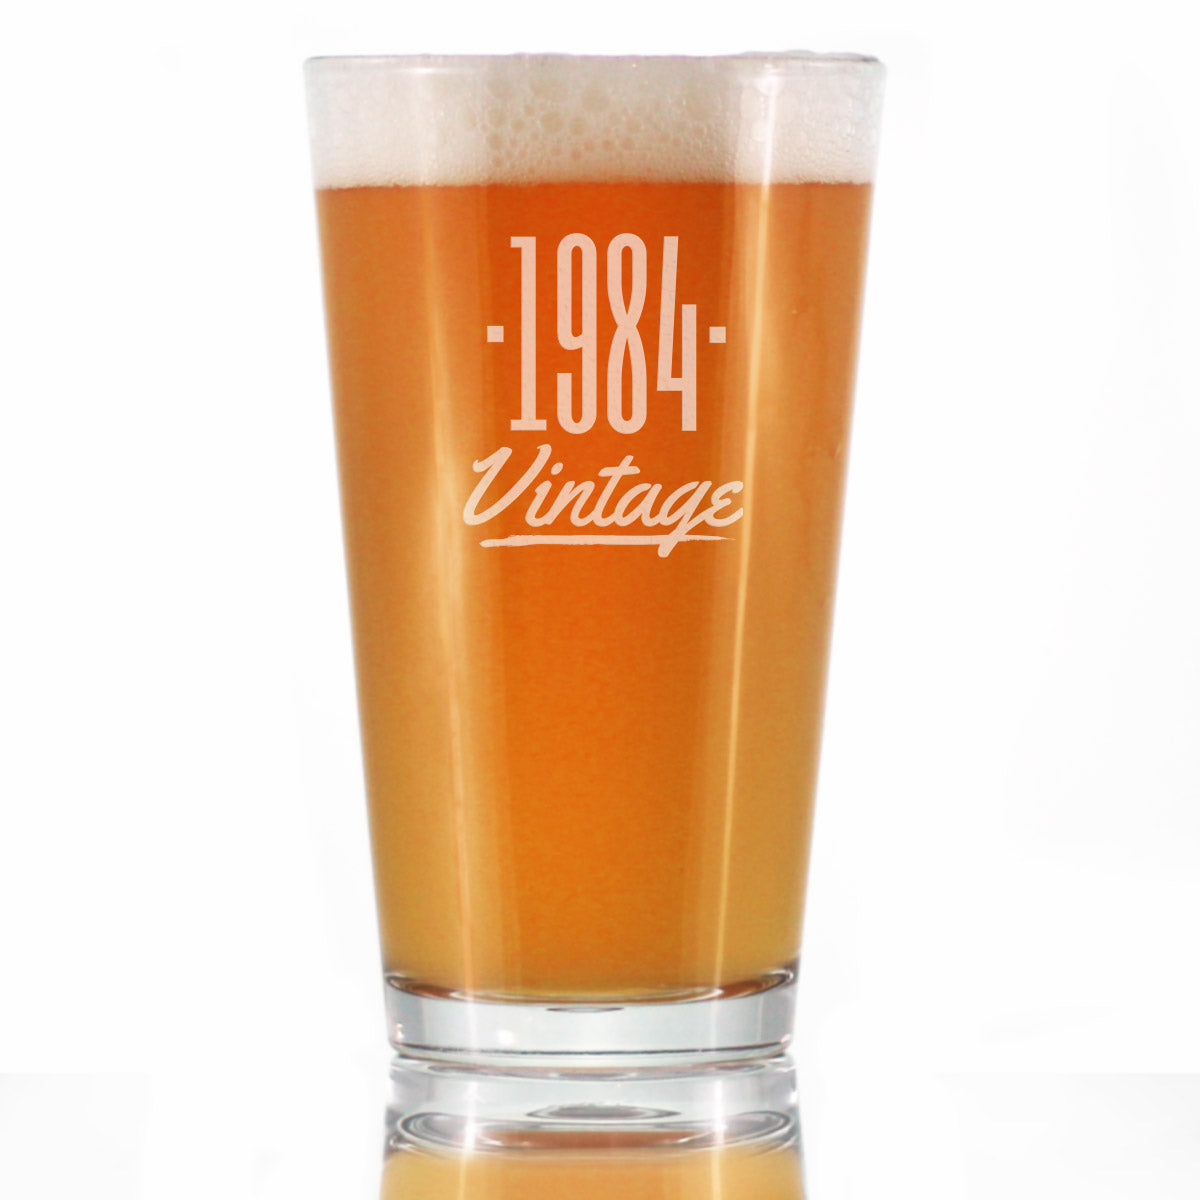 Vintage 1984 - Pint Glass for Beer - 40th Birthday Gifts for Men or Women Turning 40 - Fun Bday Party Decor - 16 oz